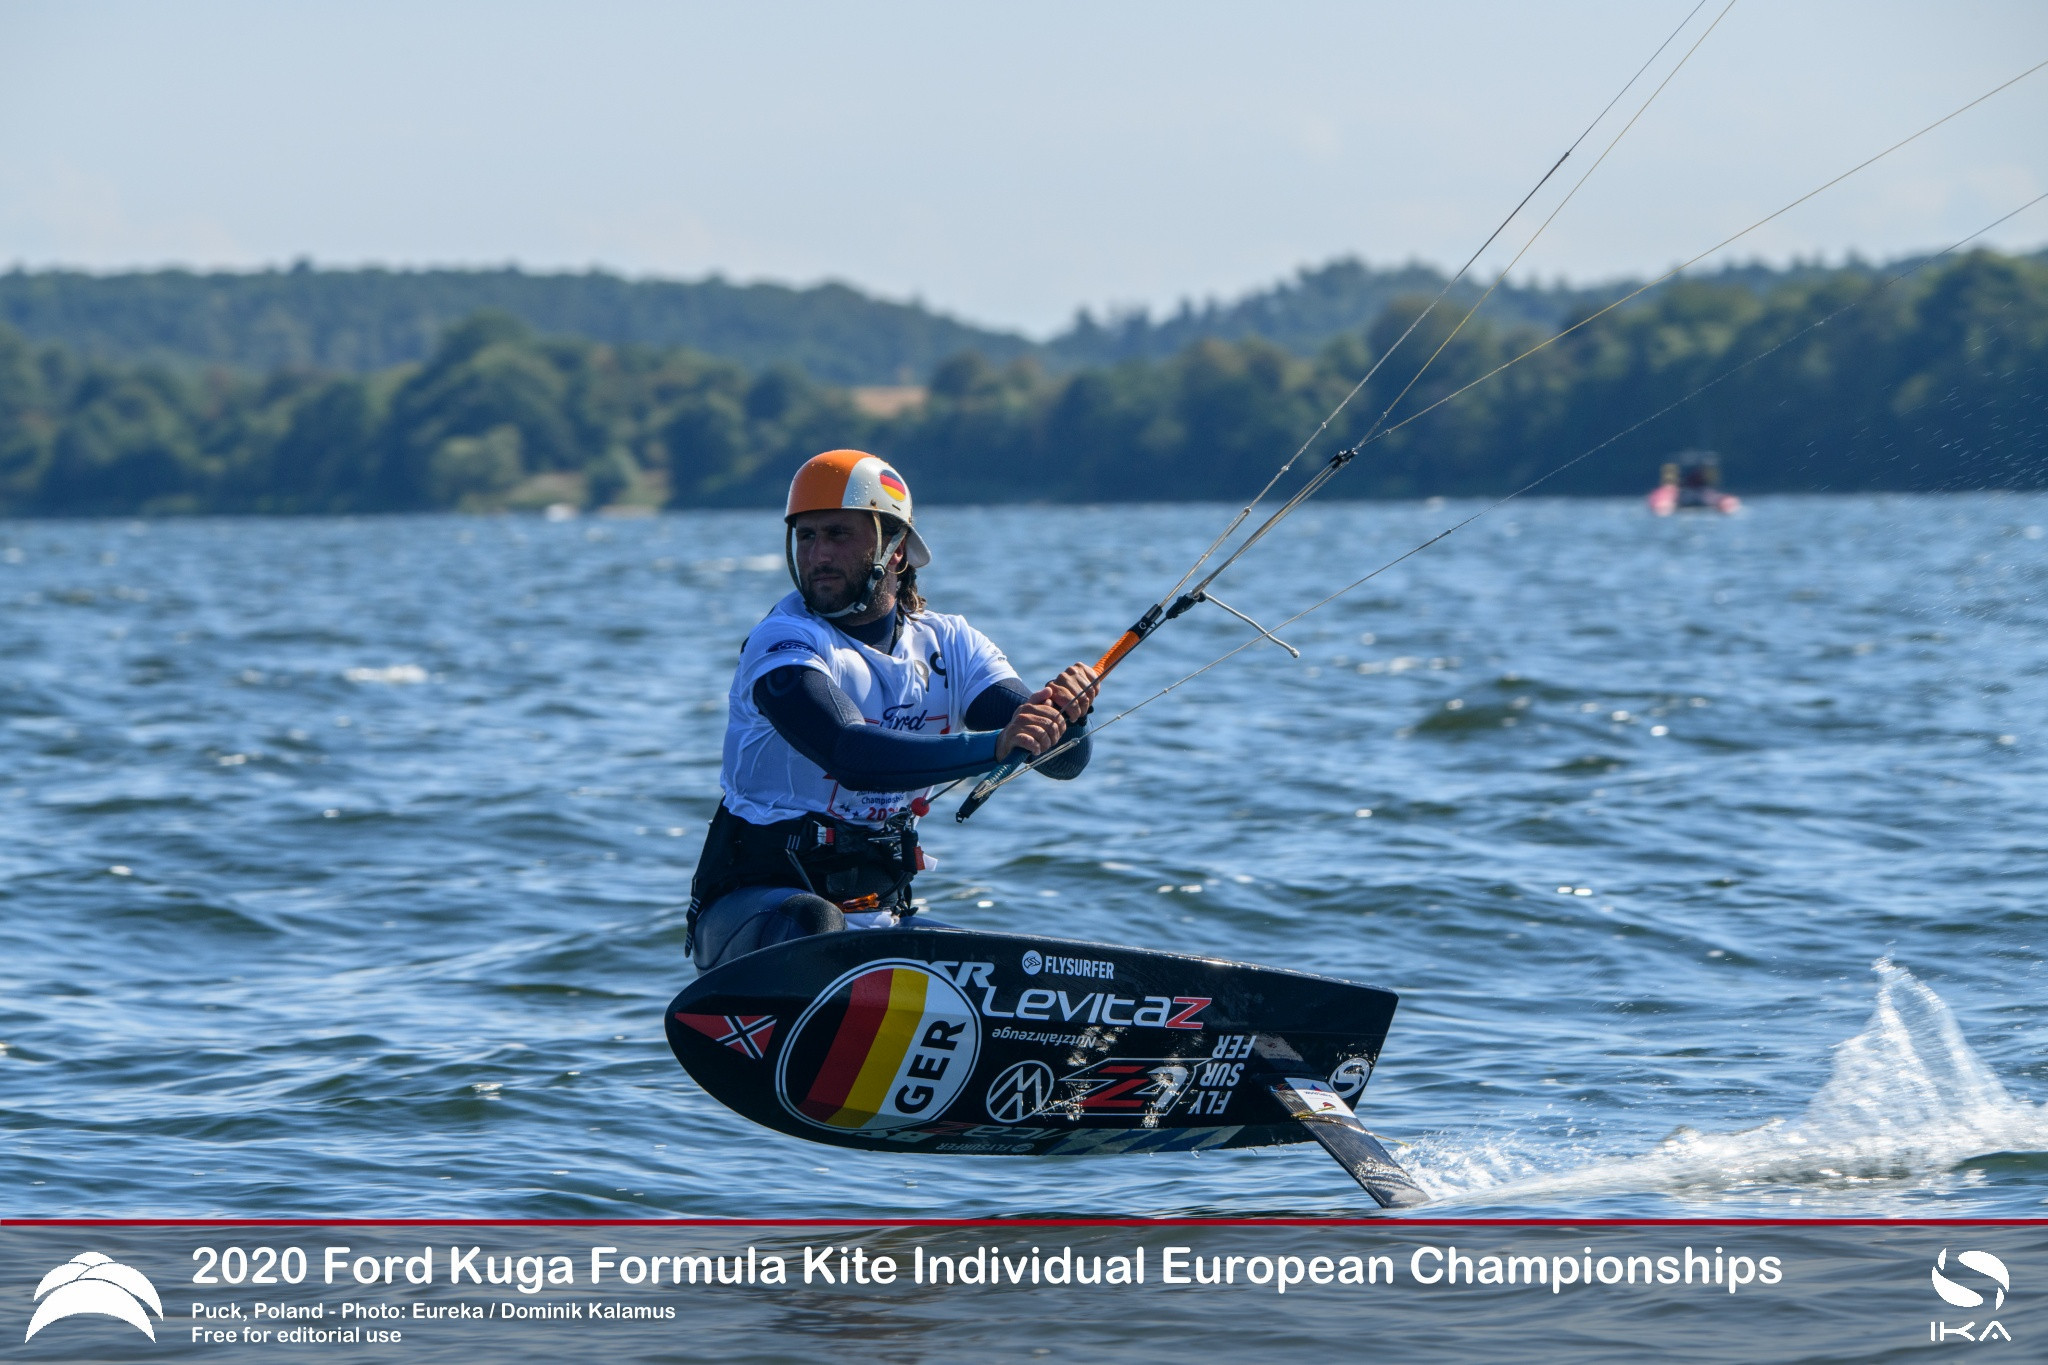 Florian Gruber kept in touch with the top five, just nine points behind the leader ©IKA